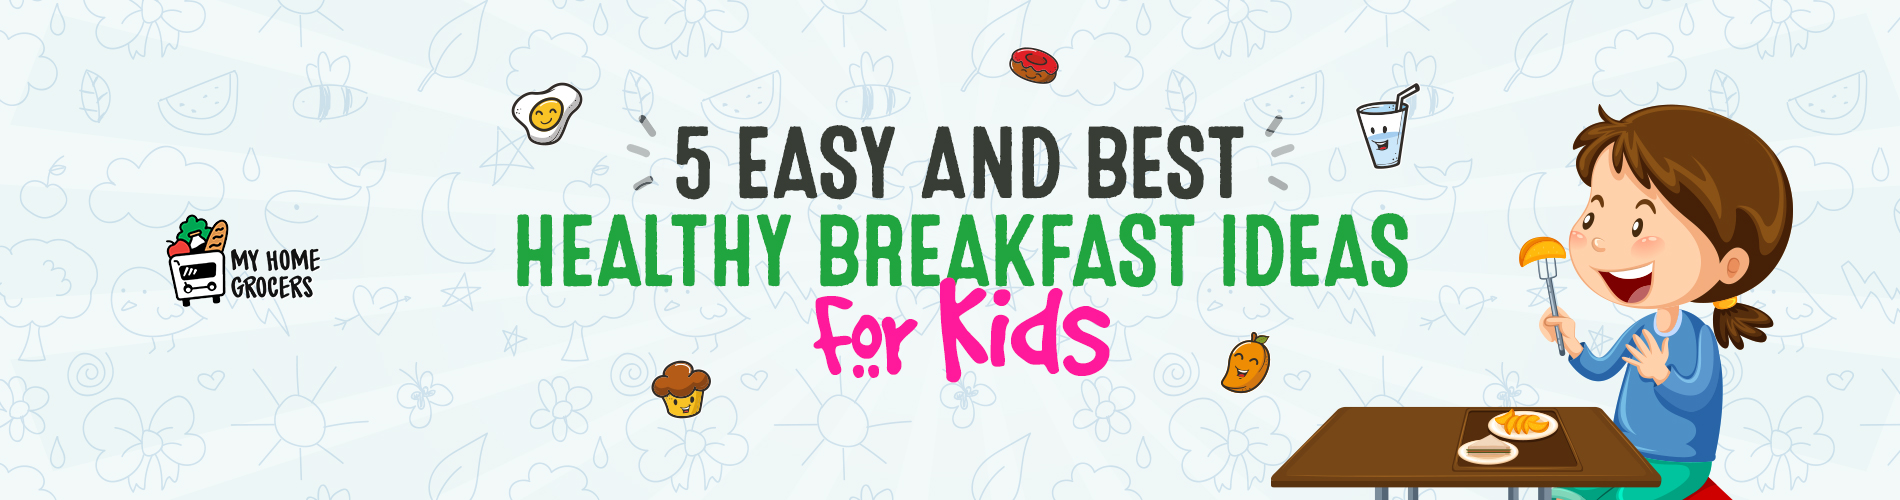 5 Easy and Best Healthy Breakfast Ideas For Kids